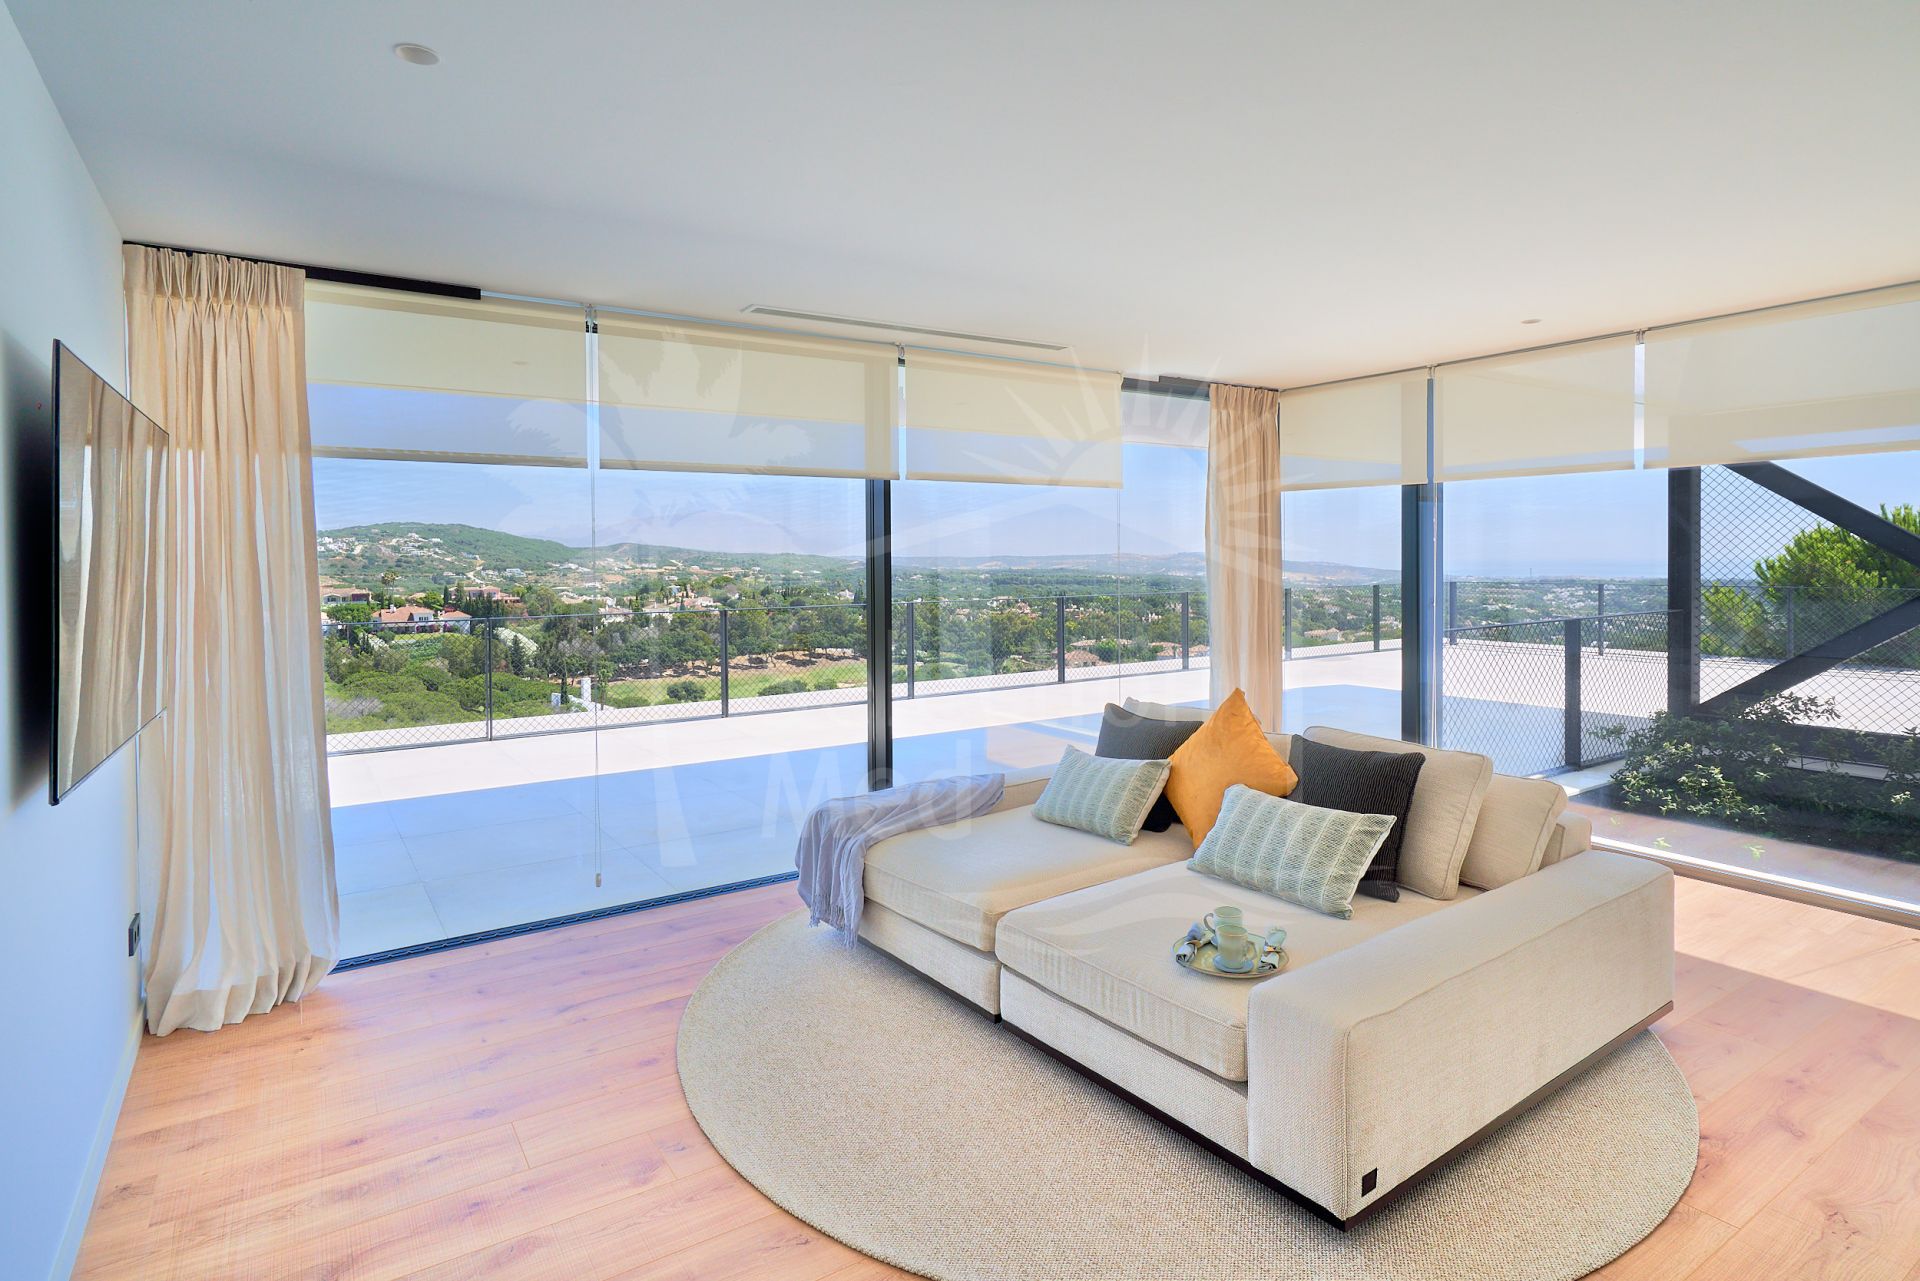 For Sale: Ultra Modern Tree Top 5 Bedroom Villa in Sotogrande Alto with Panoramic Views to the Sea